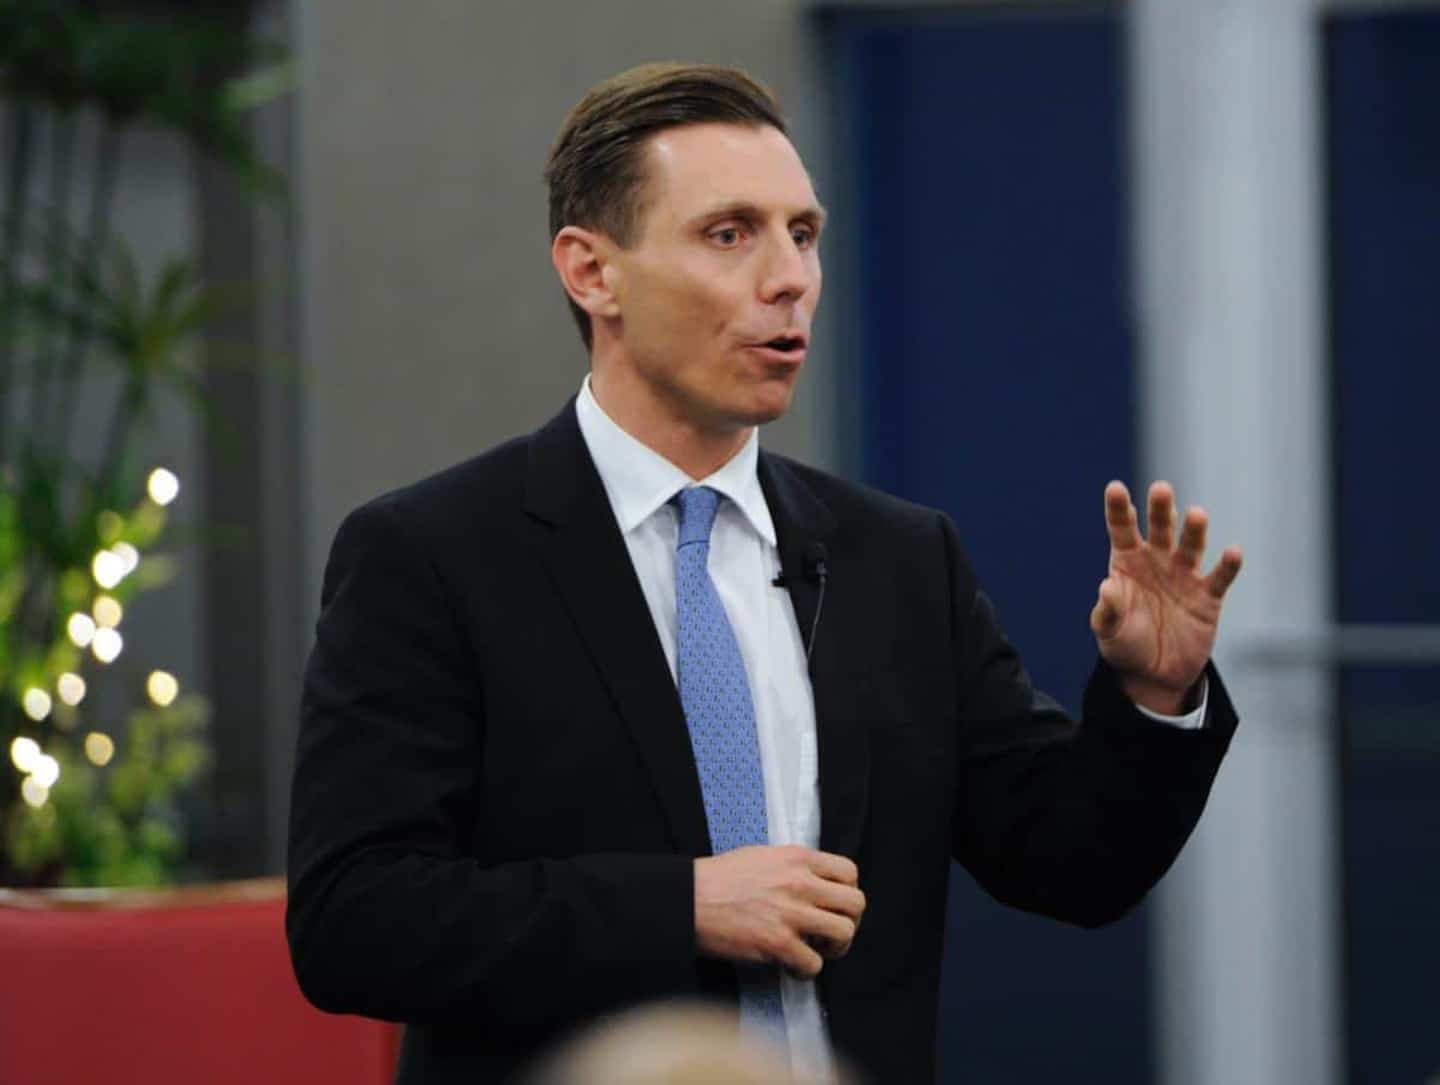 Excluded from the conservative race, Patrick Brown wants to become mayor again